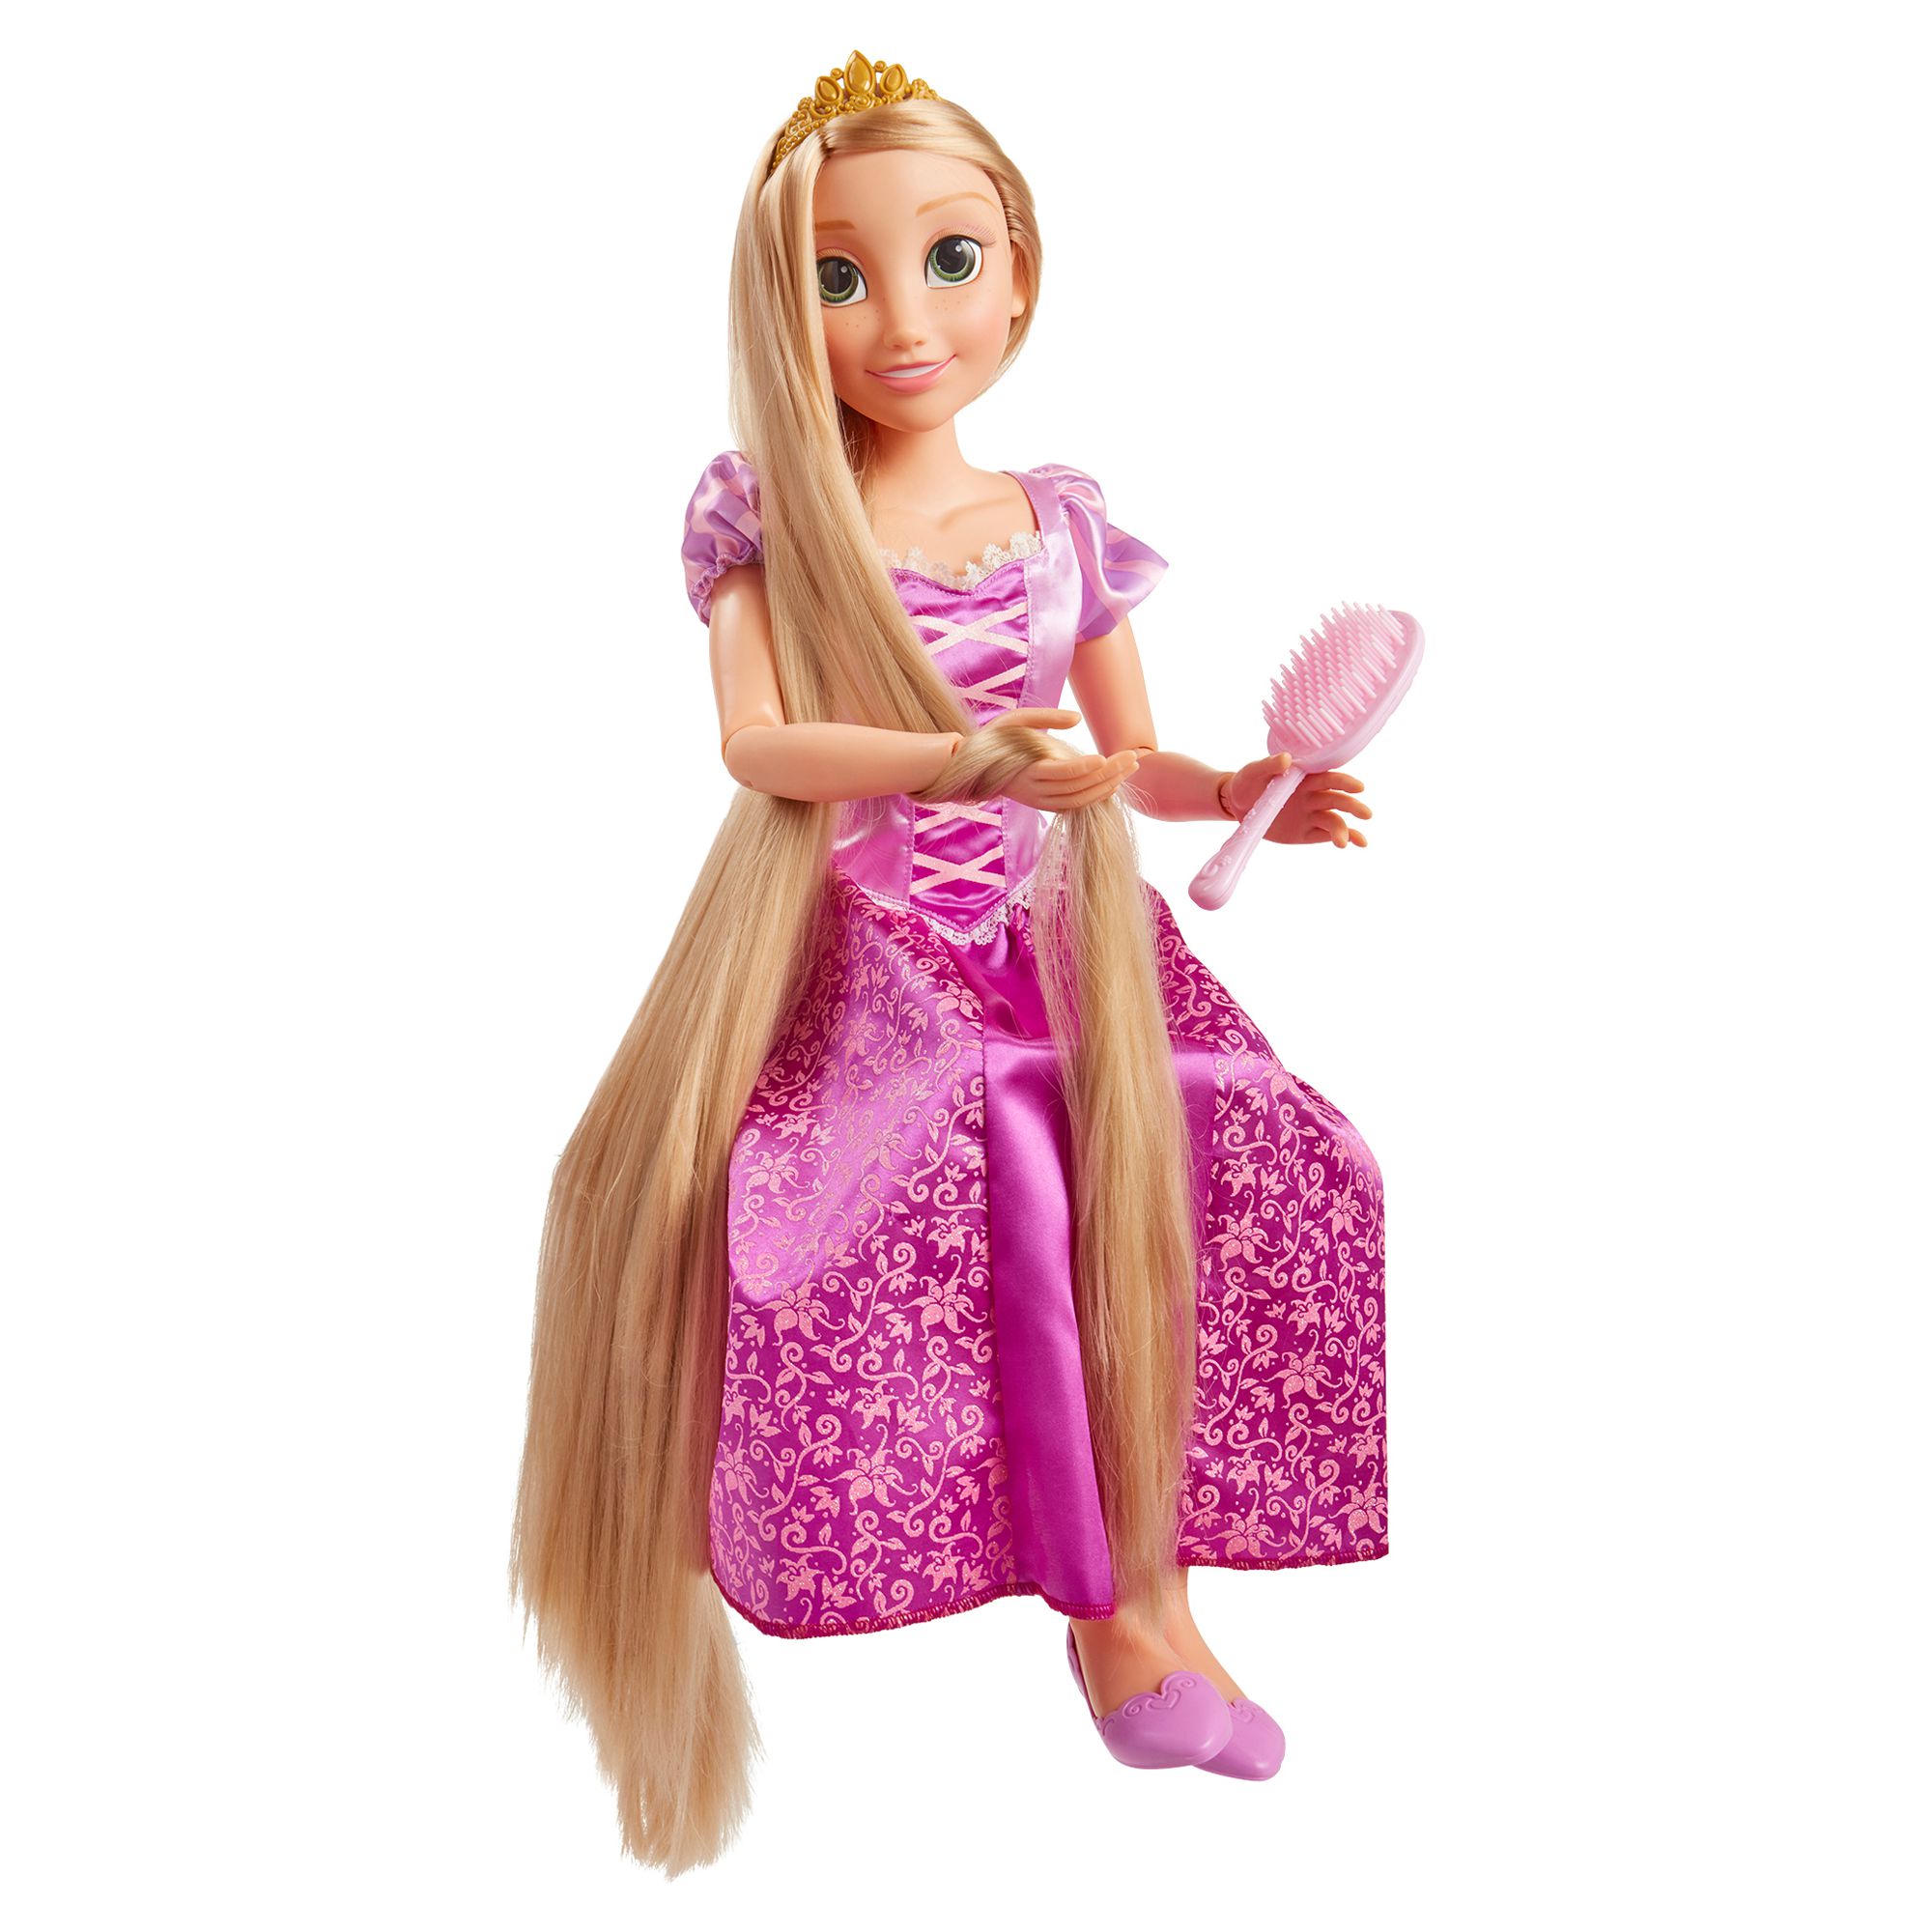 Disney Princess 32 inch Playdate Rapunzel Doll, for Children Ages 3+ - image 2 of 8